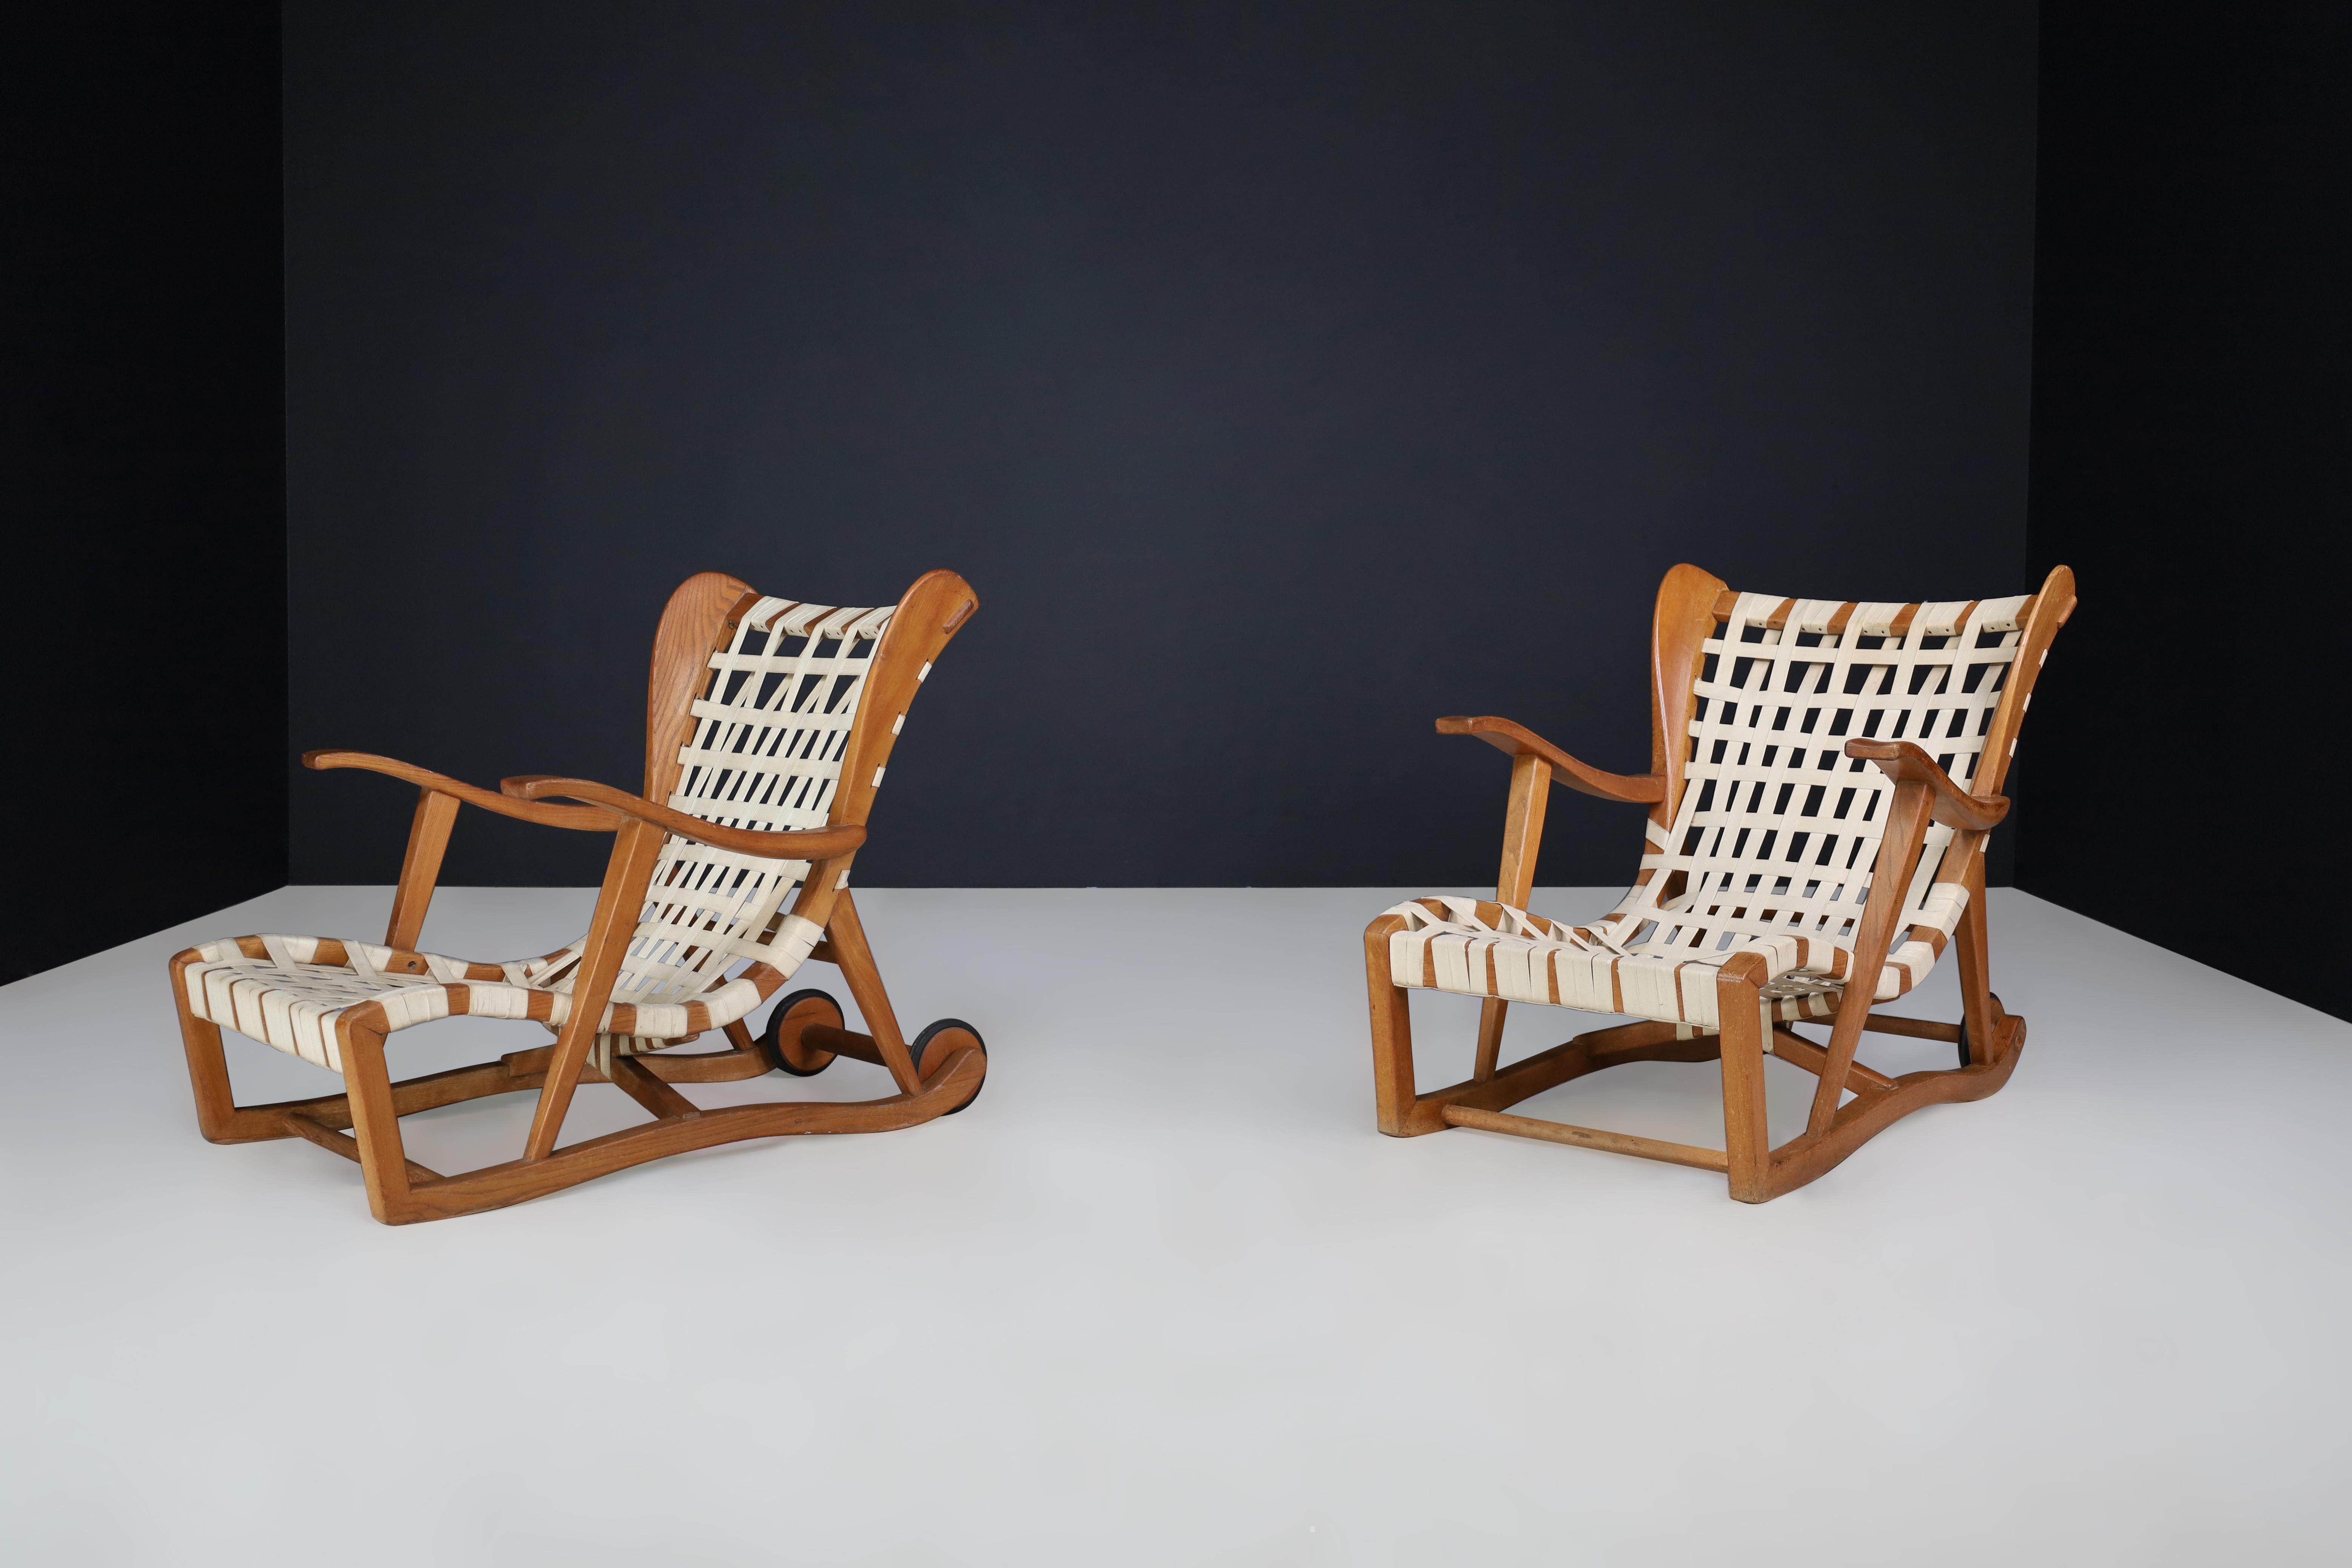 Sculptural oak Lounge chairs by Guglielmo Pecorini, Italy, the 1950s   For Sale 3